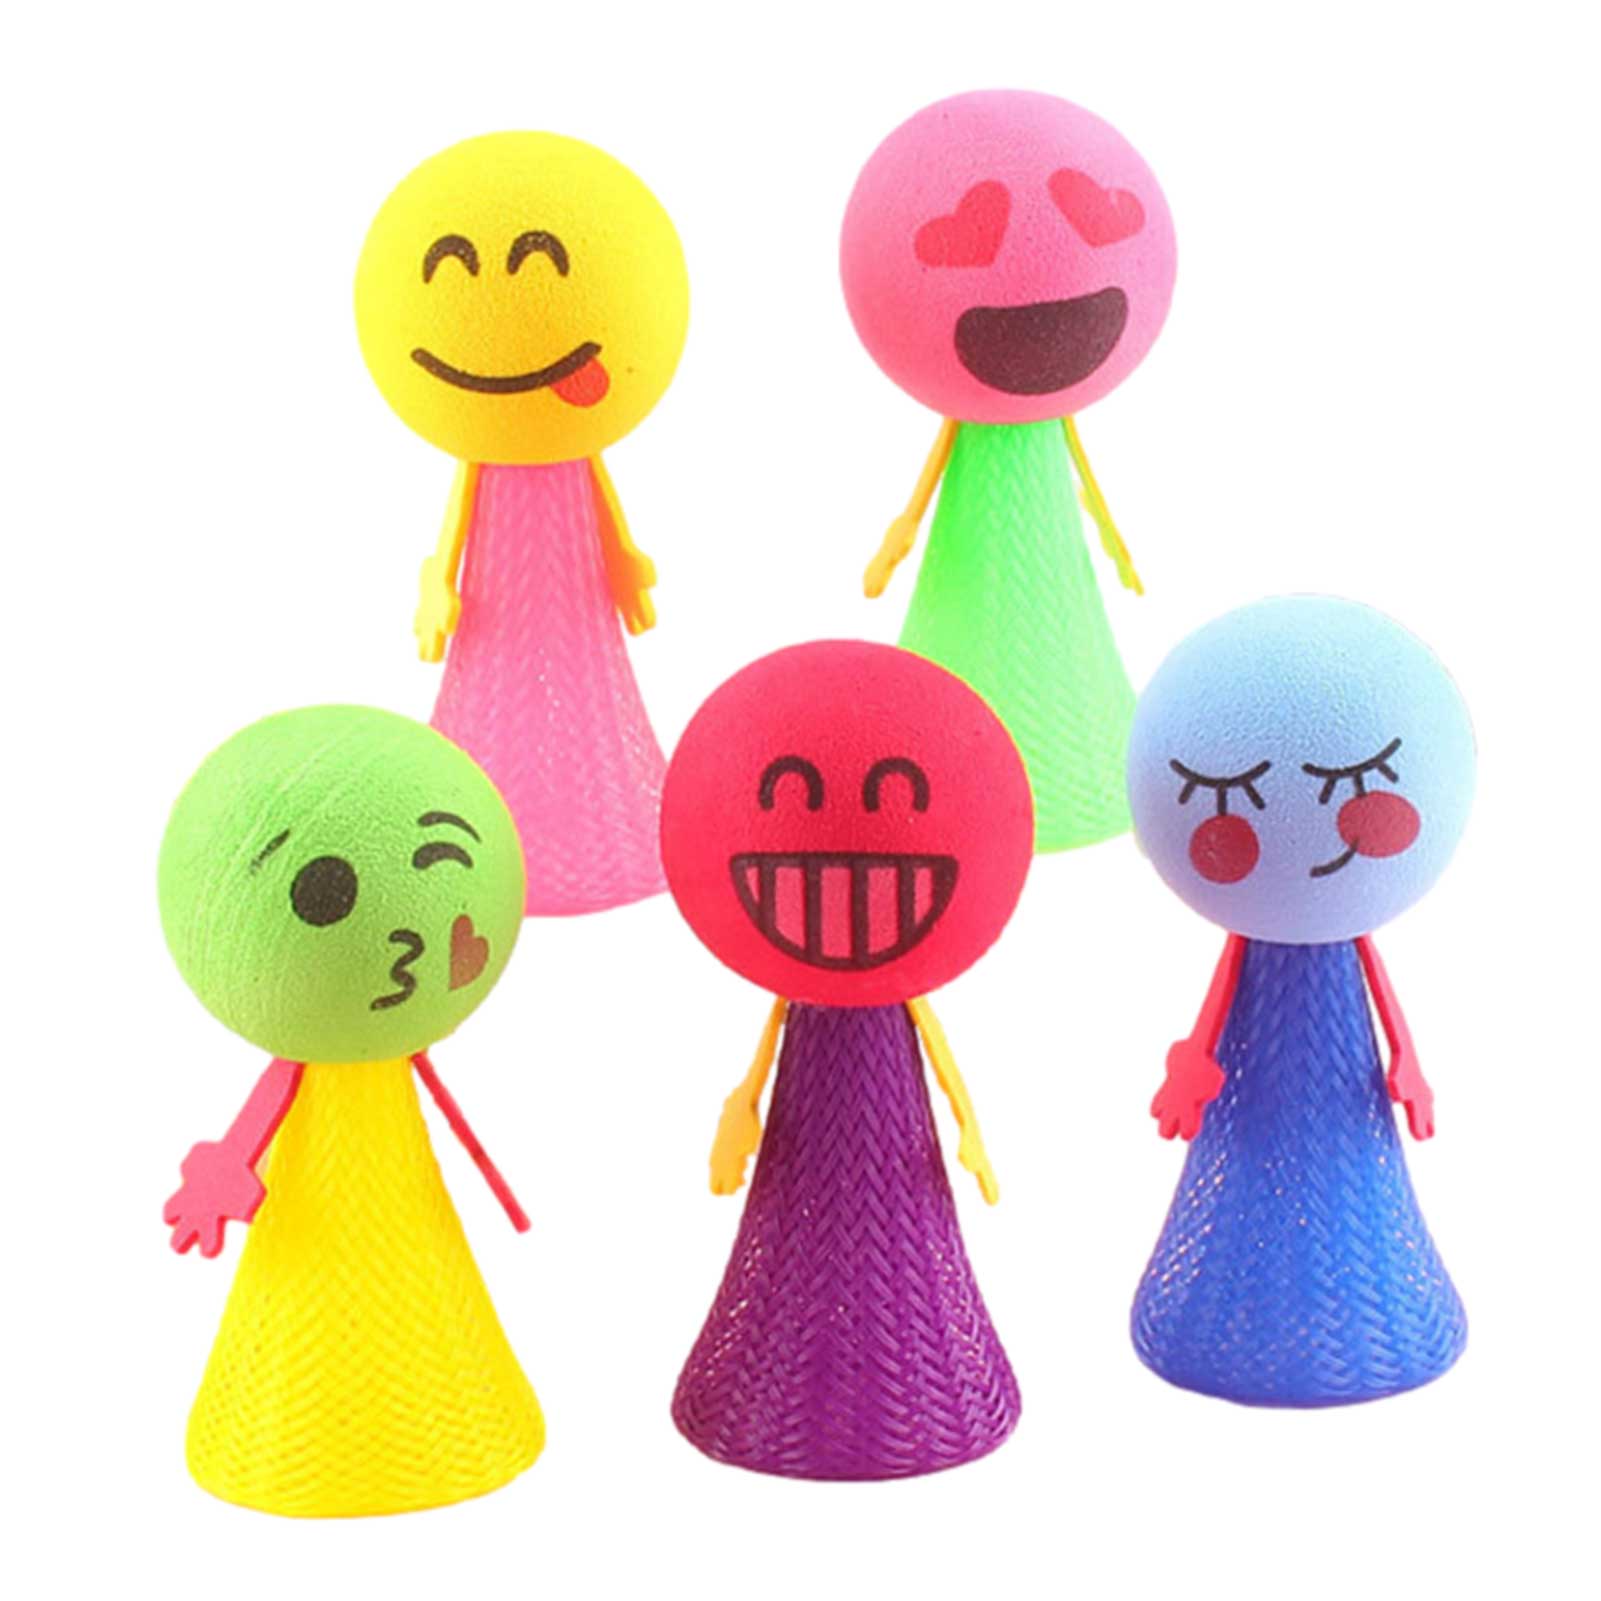 Jumping Elf Toy Cartoon Decompression Doll Bouncing Strange New Toy Bounce Elf Children's Educational Big Head Doll Toys